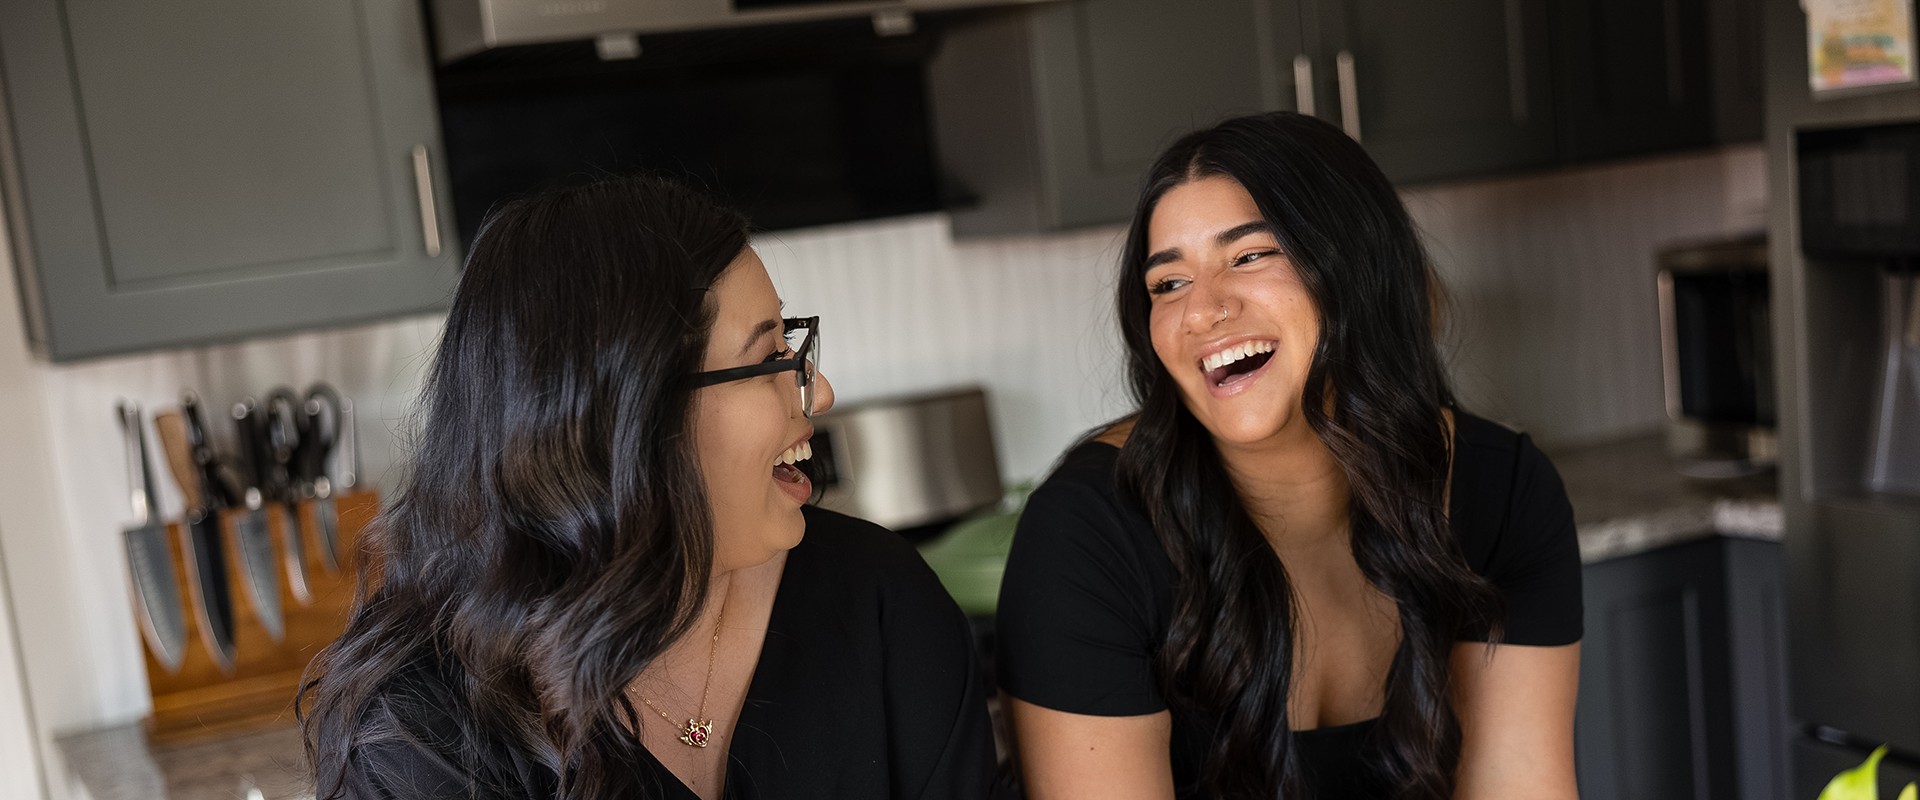 Two women laughing at a kitchen counter